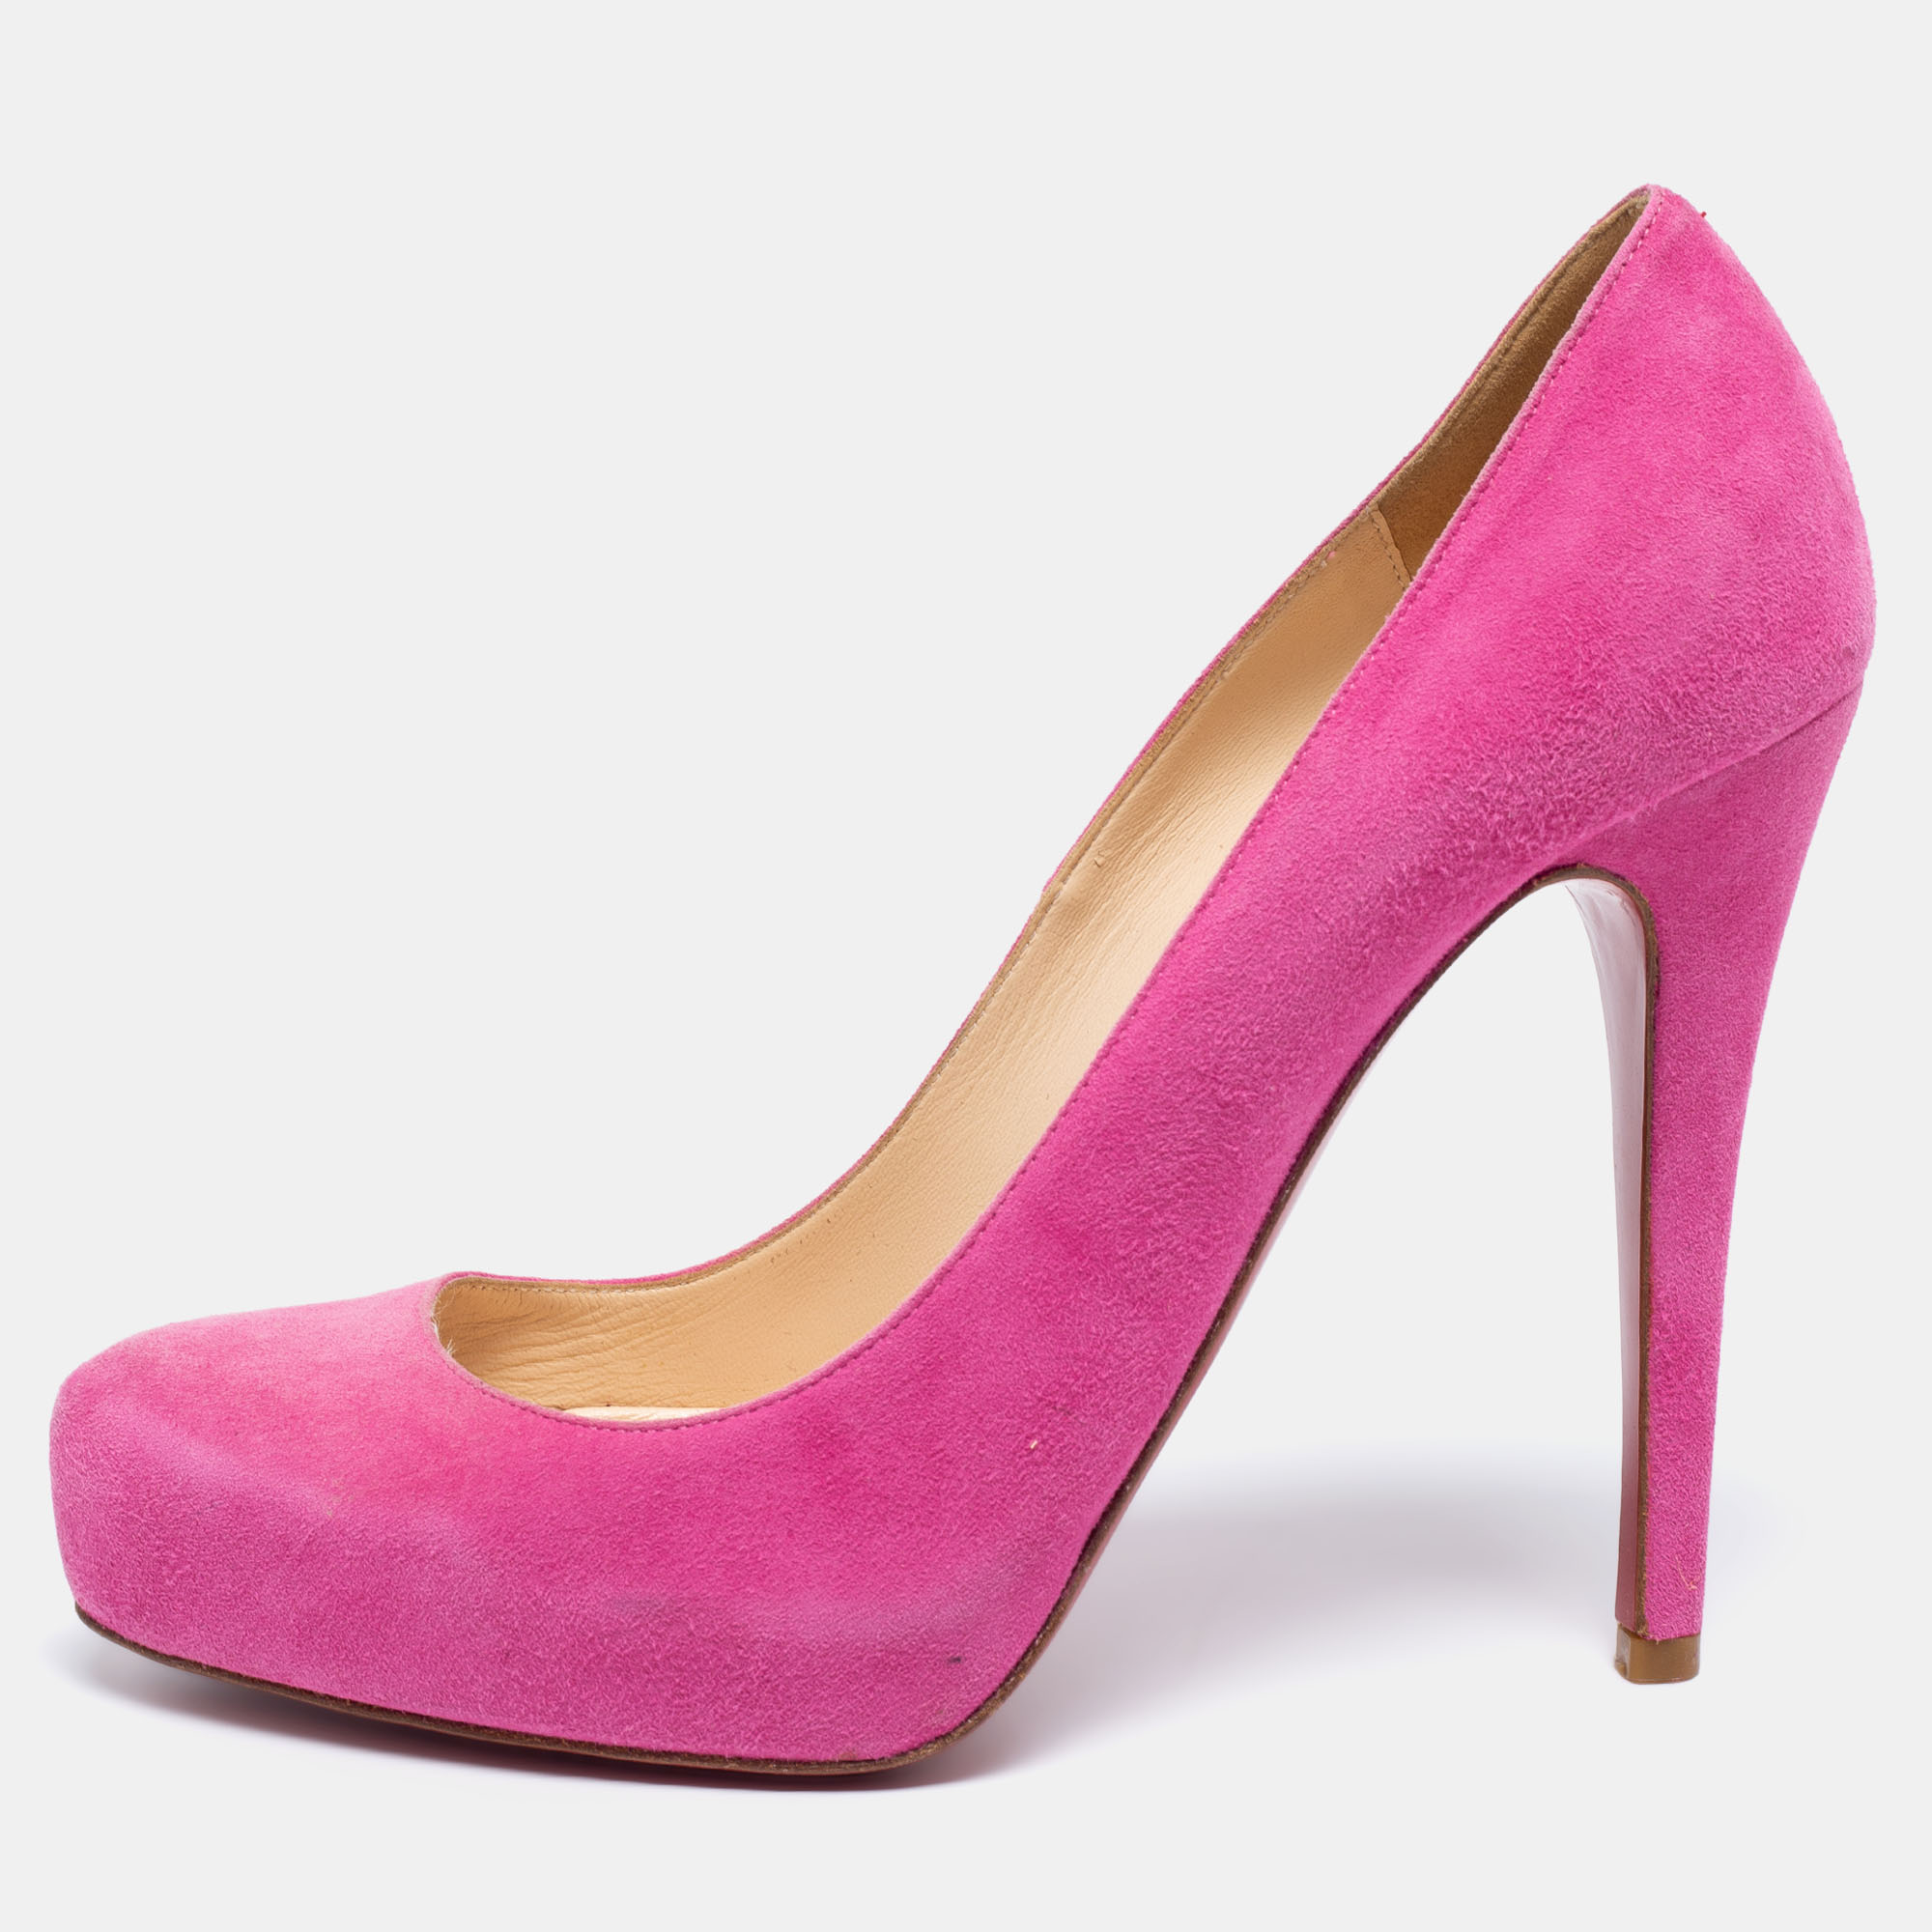 Pre-owned Christian Louboutin Pink Suede Elisa Pumps Size 38.5